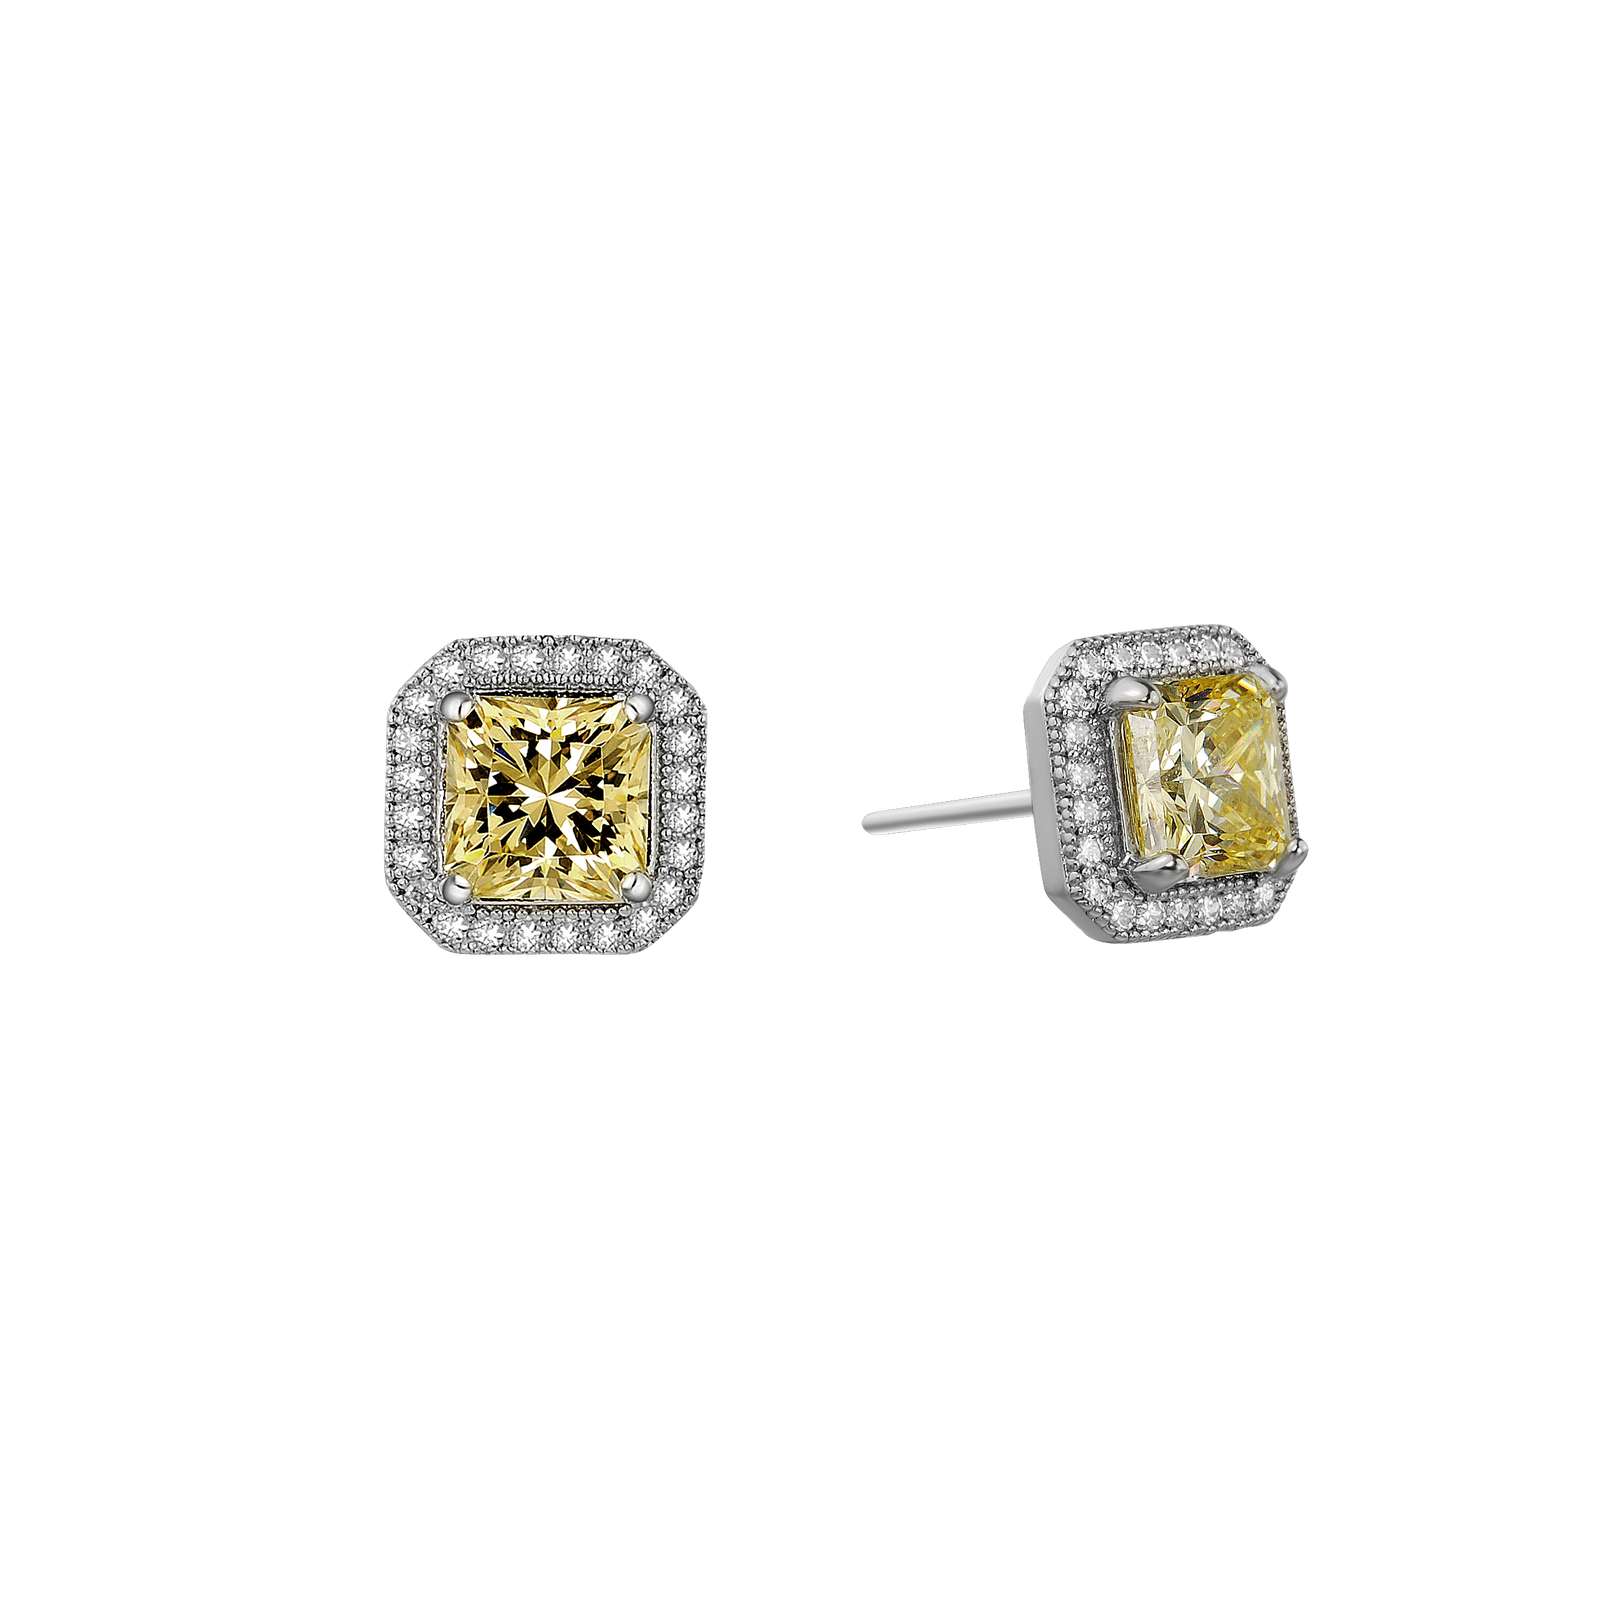 Classic Canary Platinum Bonded Earrings Wood's Jewelers Mt. Pleasant, PA